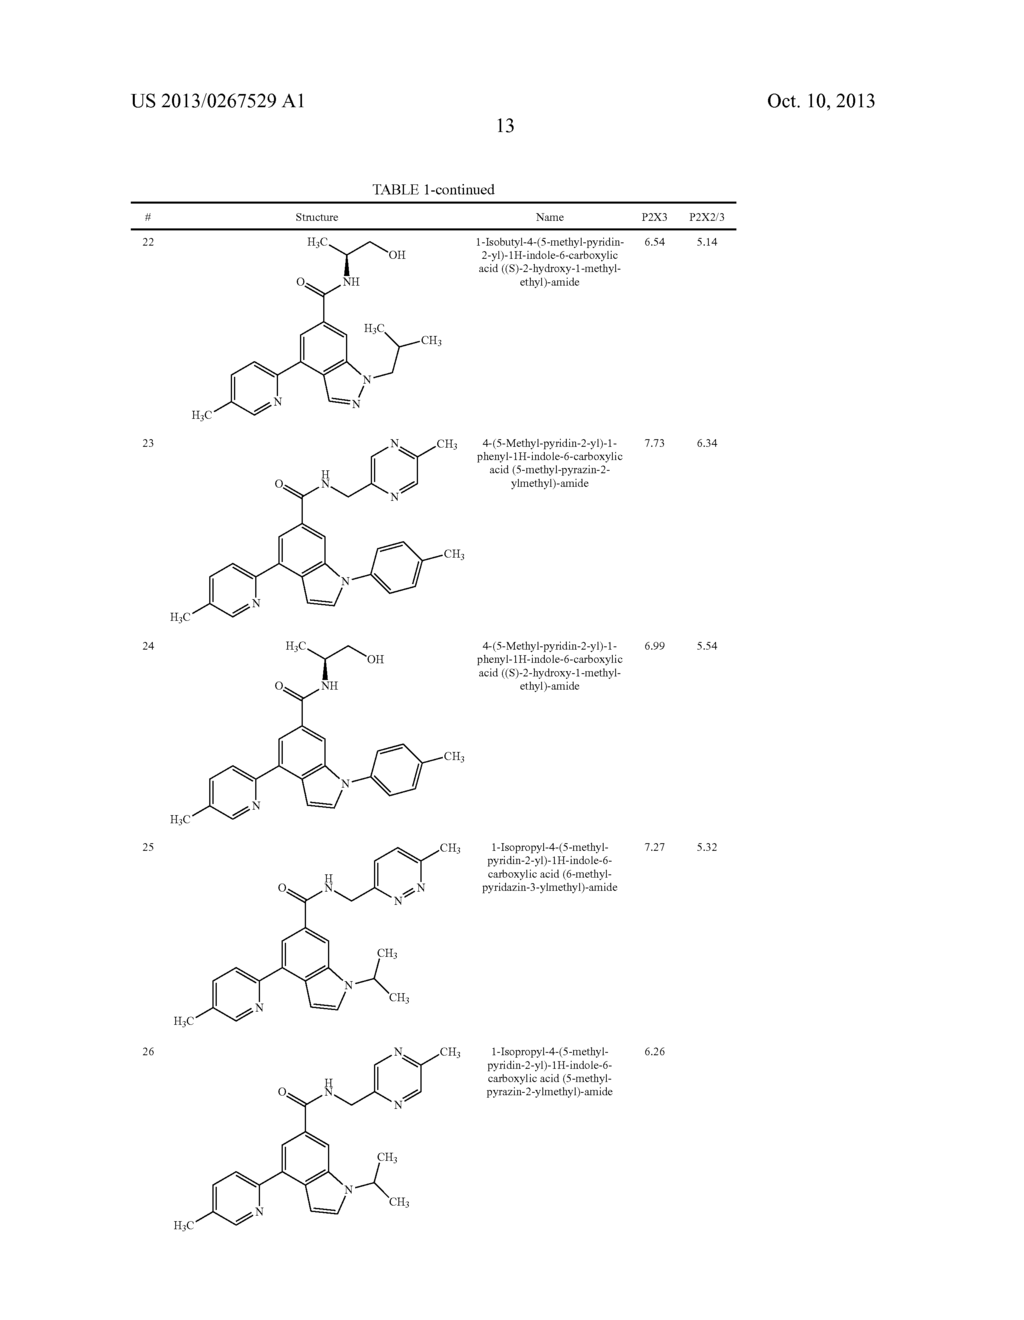 INDOLE, INDAZOLE AND BENZIMIDAZOLE ARYLAMIDES AS P2X3 AND P2X2/3     ANTAGONISTS - diagram, schematic, and image 14